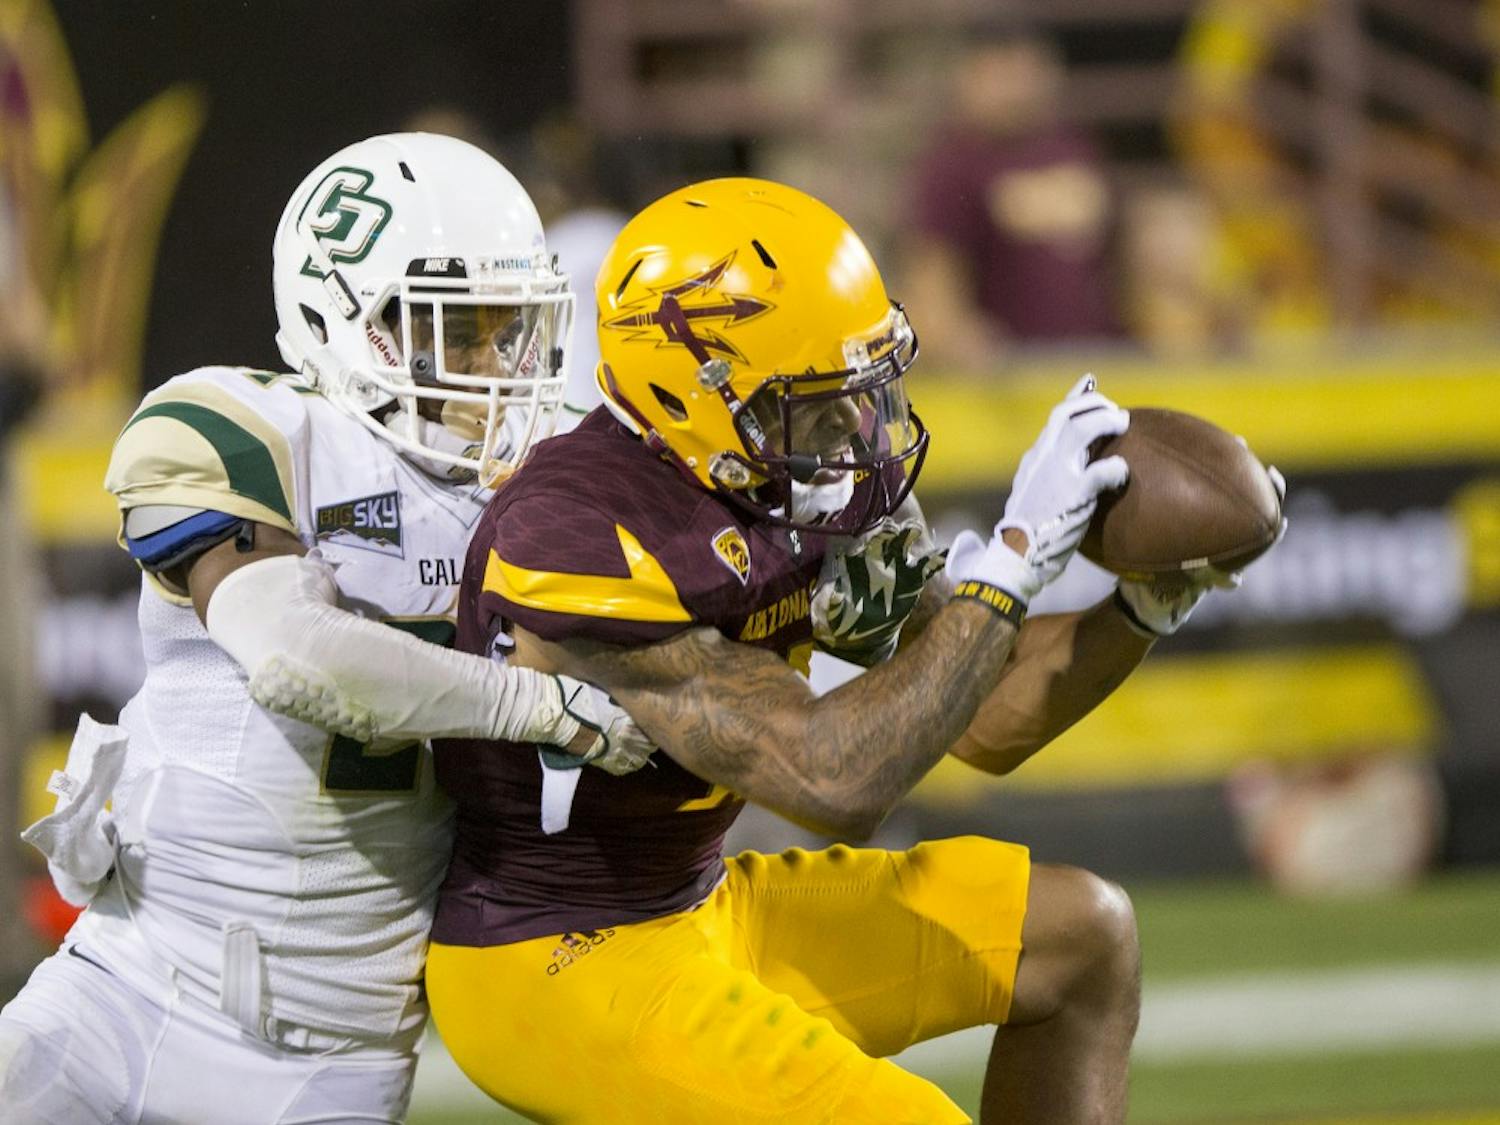 Wide receiver Devin Lucien snags a pass during a game against visiting Cal Poly at Sun Devil Stadium in Tempe on Saturday, Sept. 12, 2015. ASU beat Cal Poly 35-21 in their season opener. 